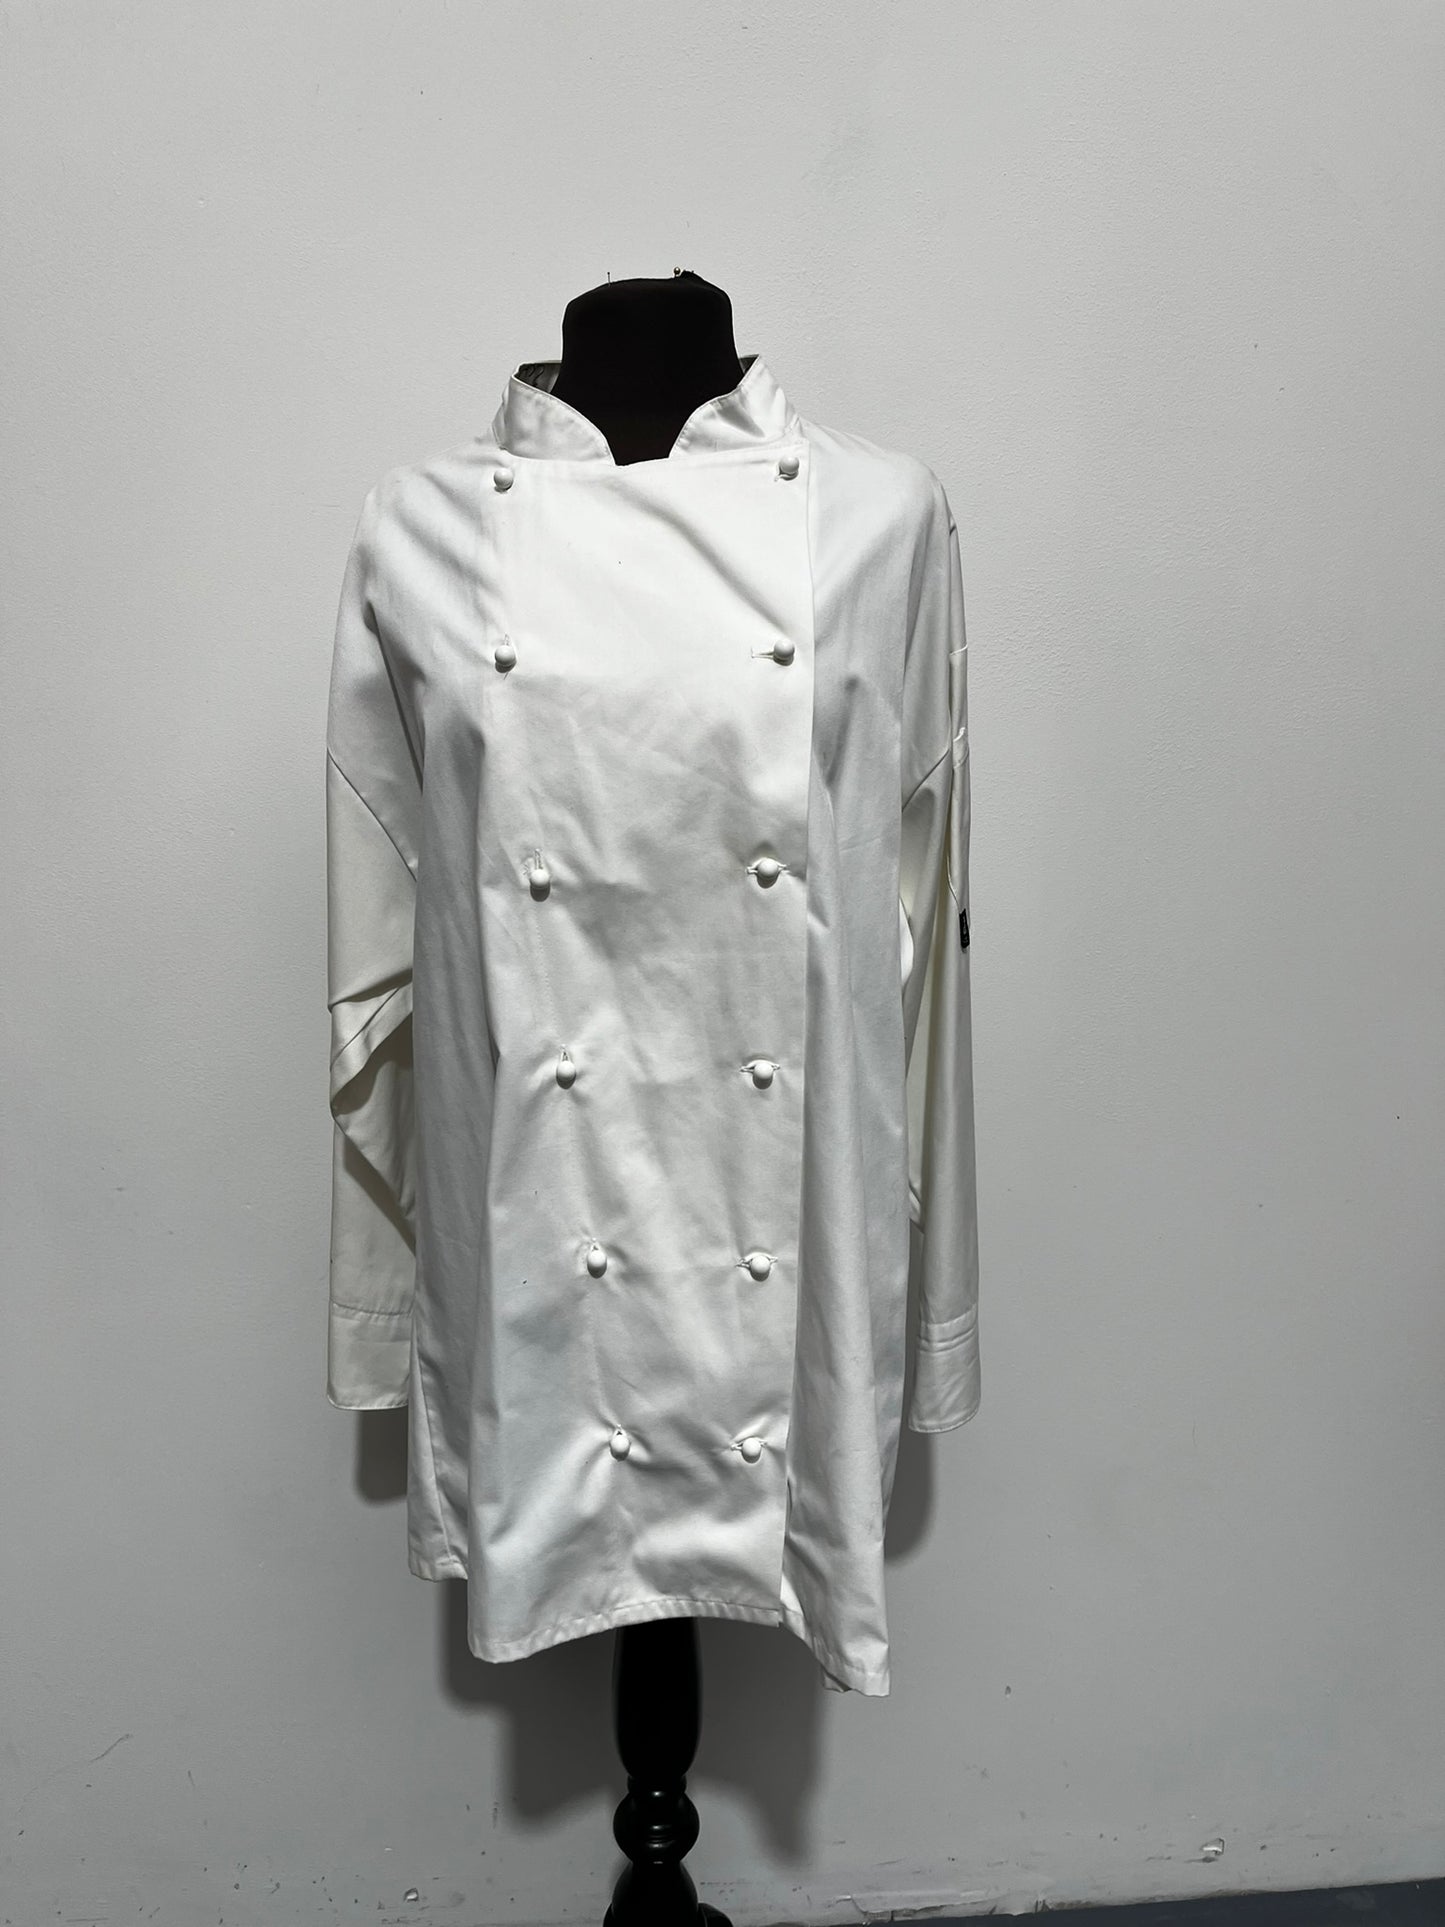 Authentic Chef Whites Uniform in USED Condition Size M/L